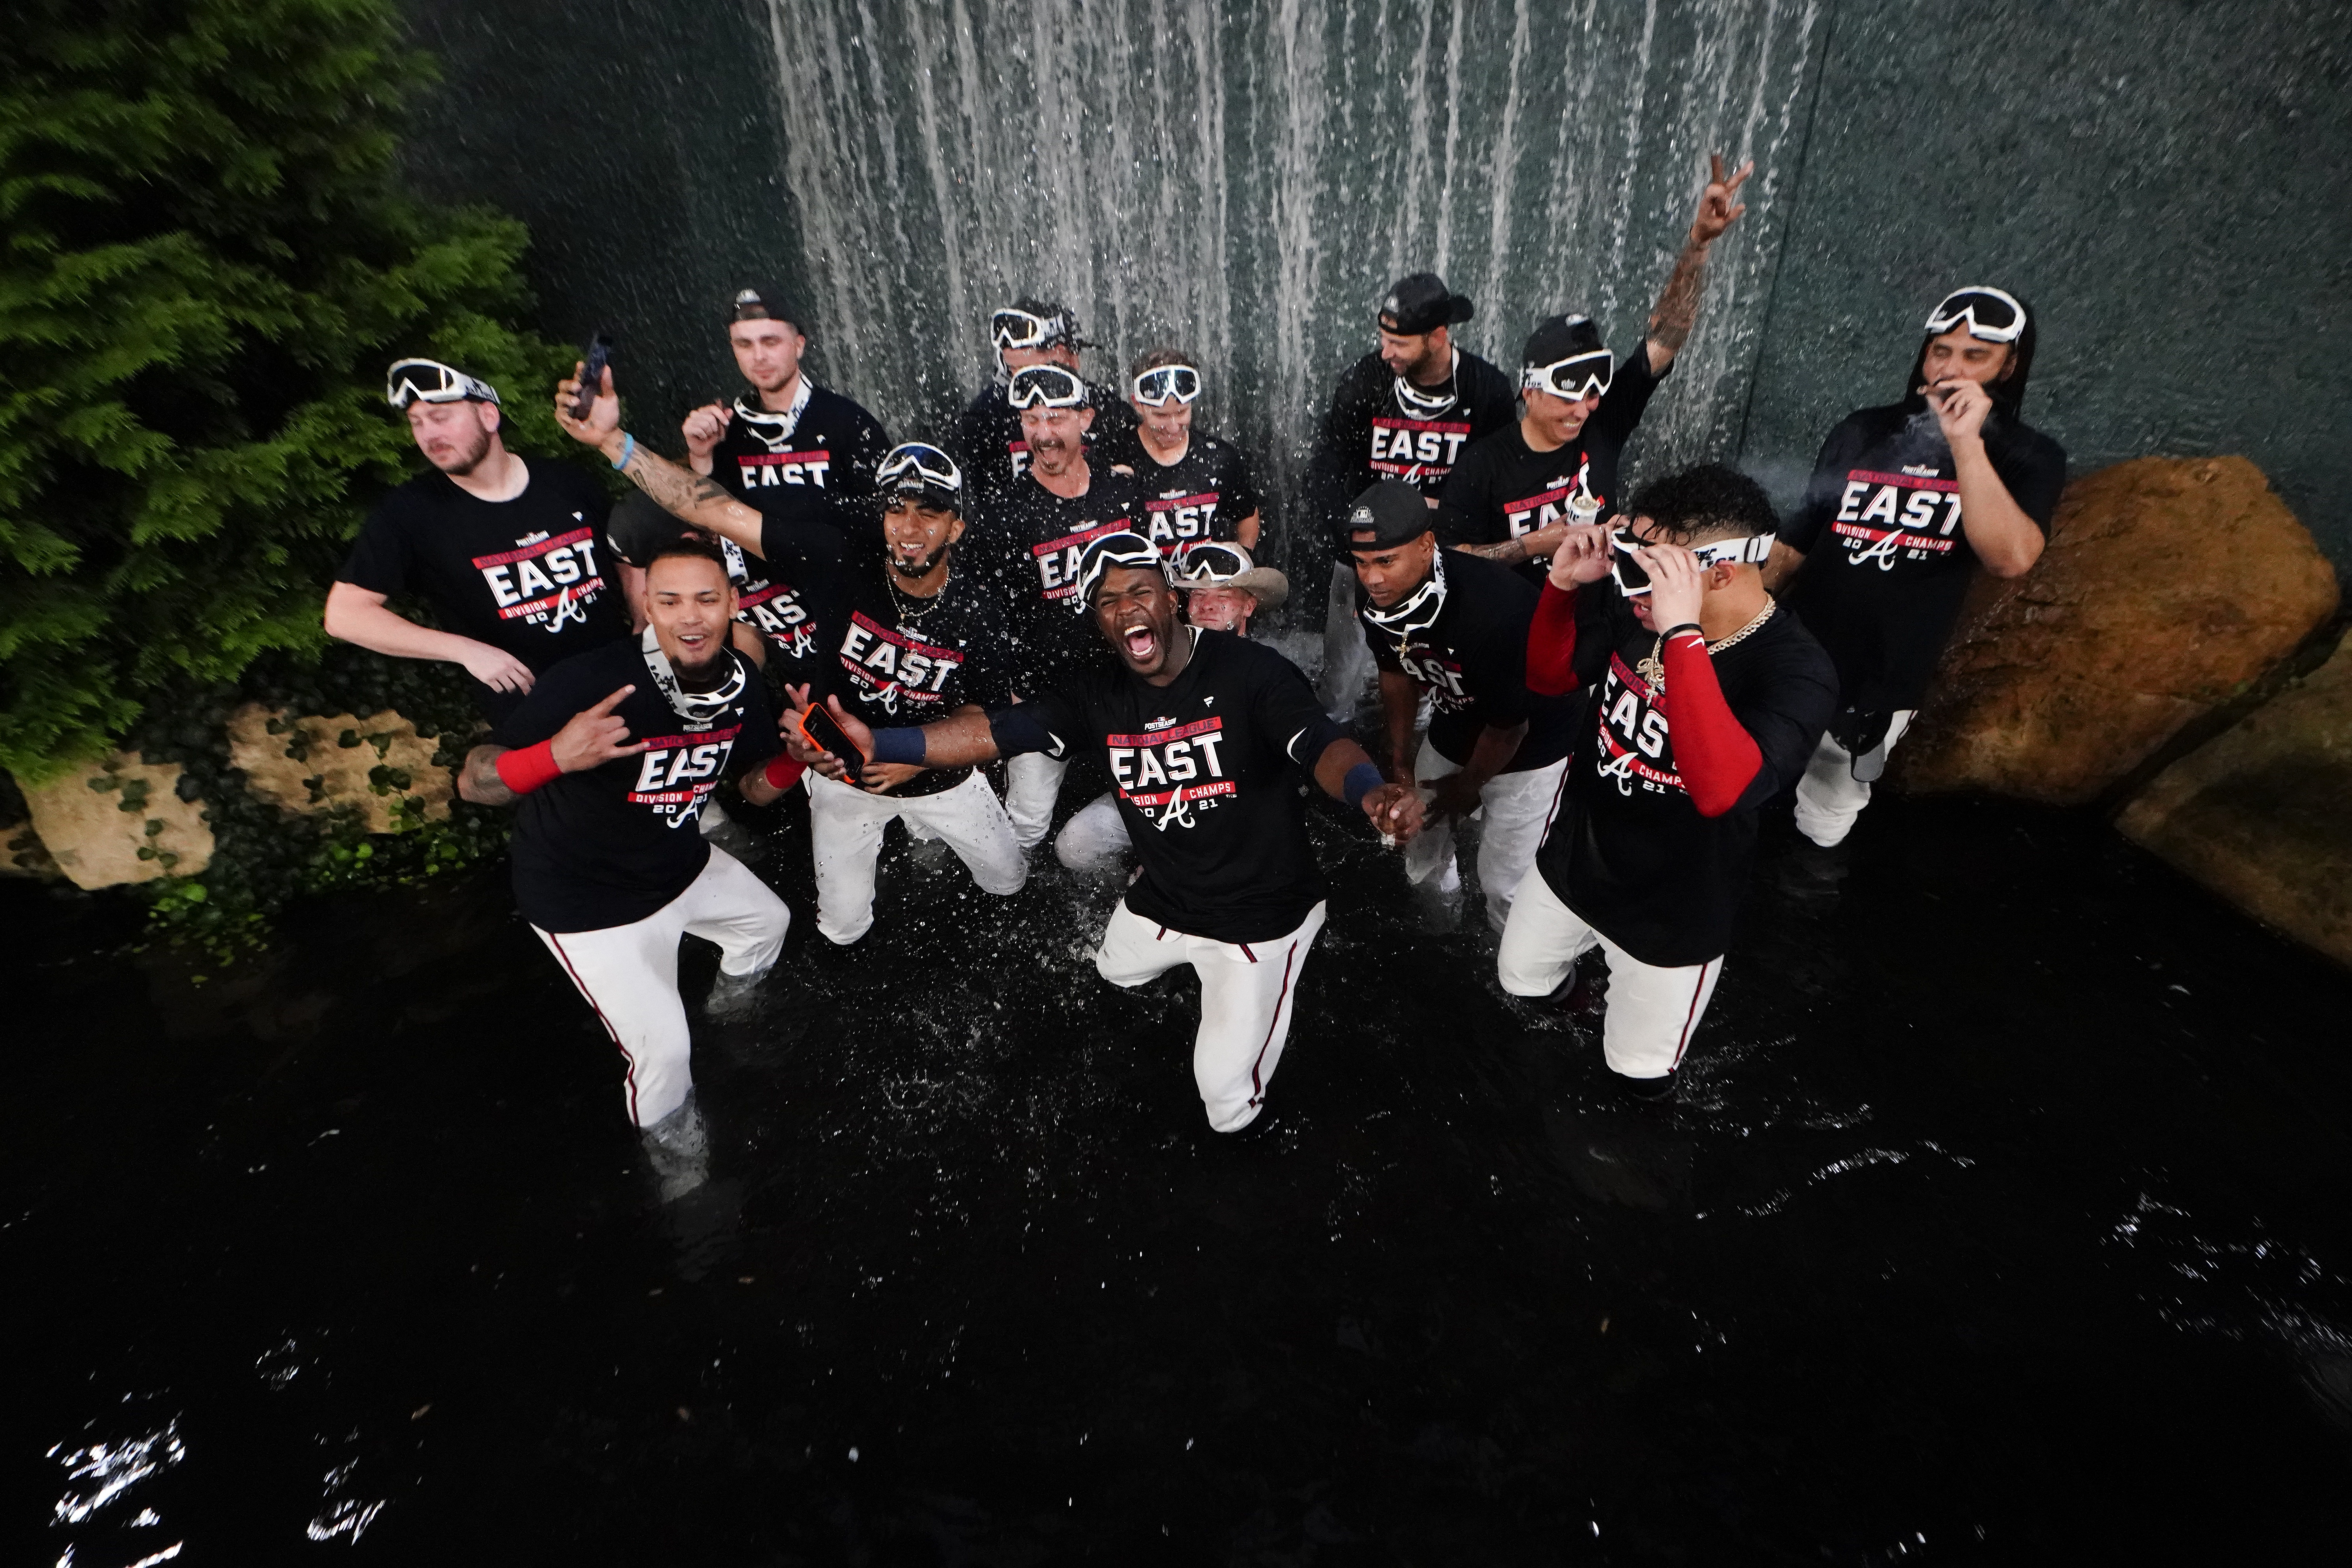 Ozuna, Braves beat Miami, clinch 3rd straight NL East title - The